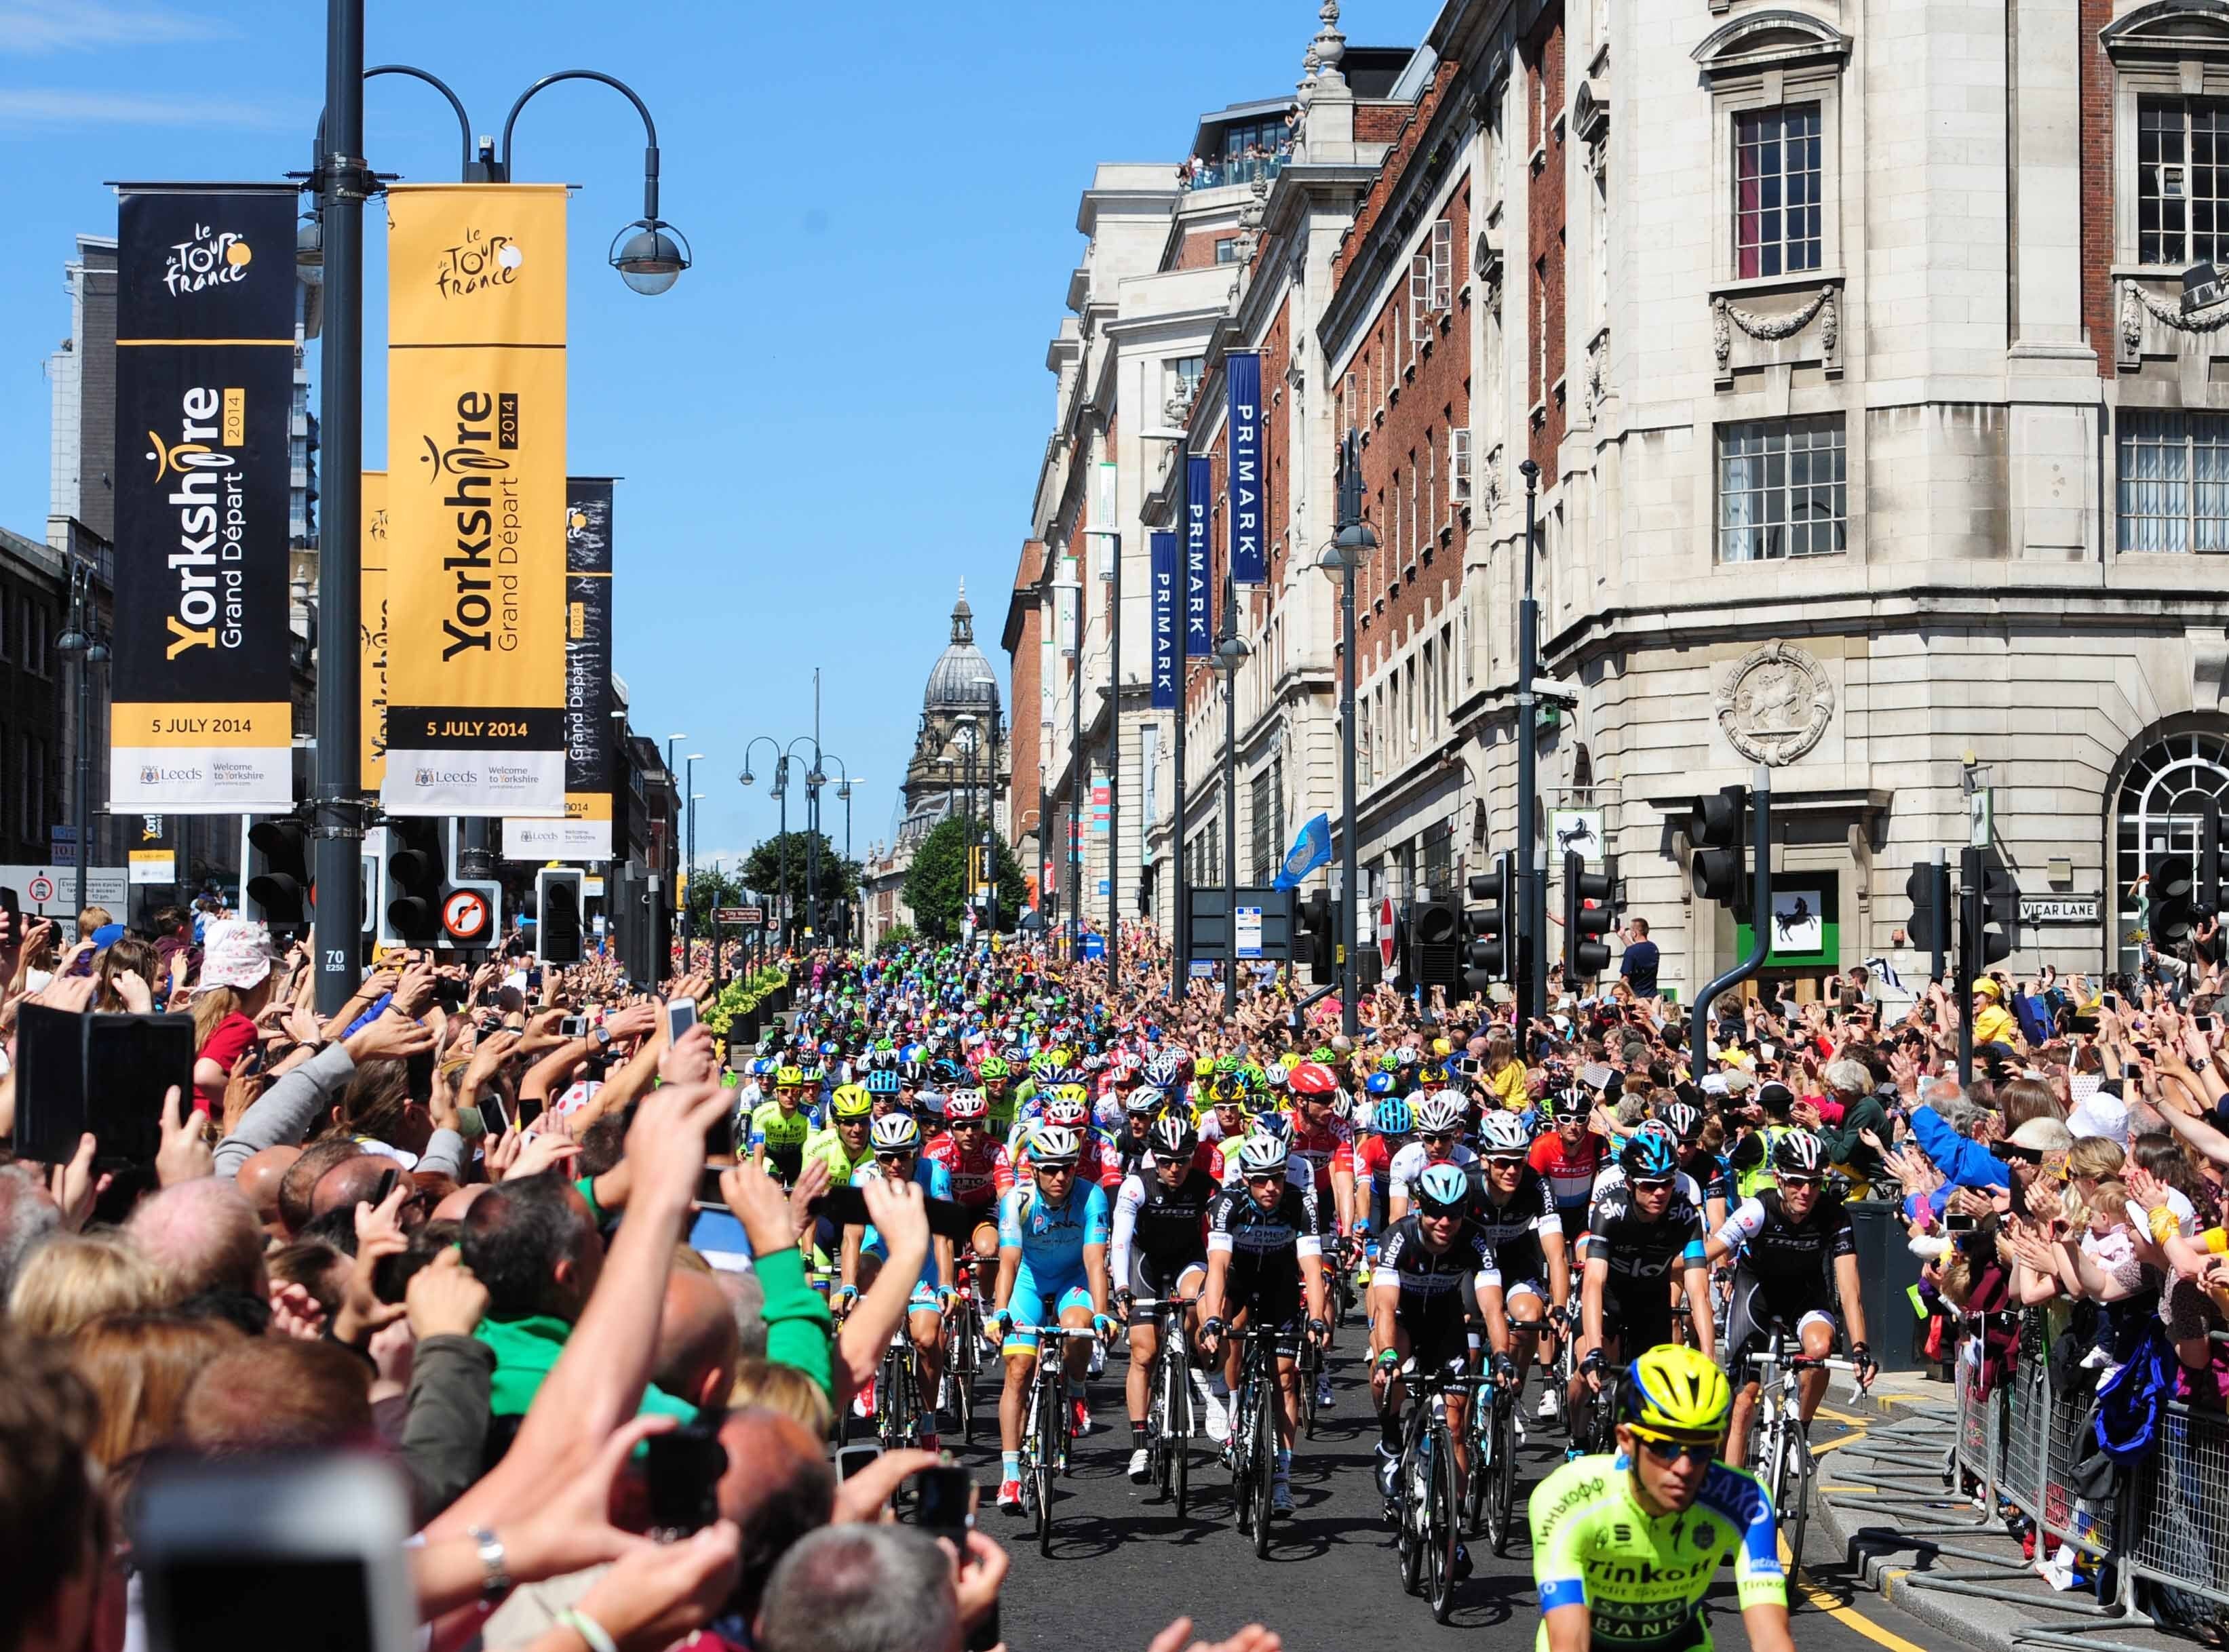 The Tour de France was last in the UK in 2014 and started in West Yorkshire (Anthony Chappel-Ross/PA)